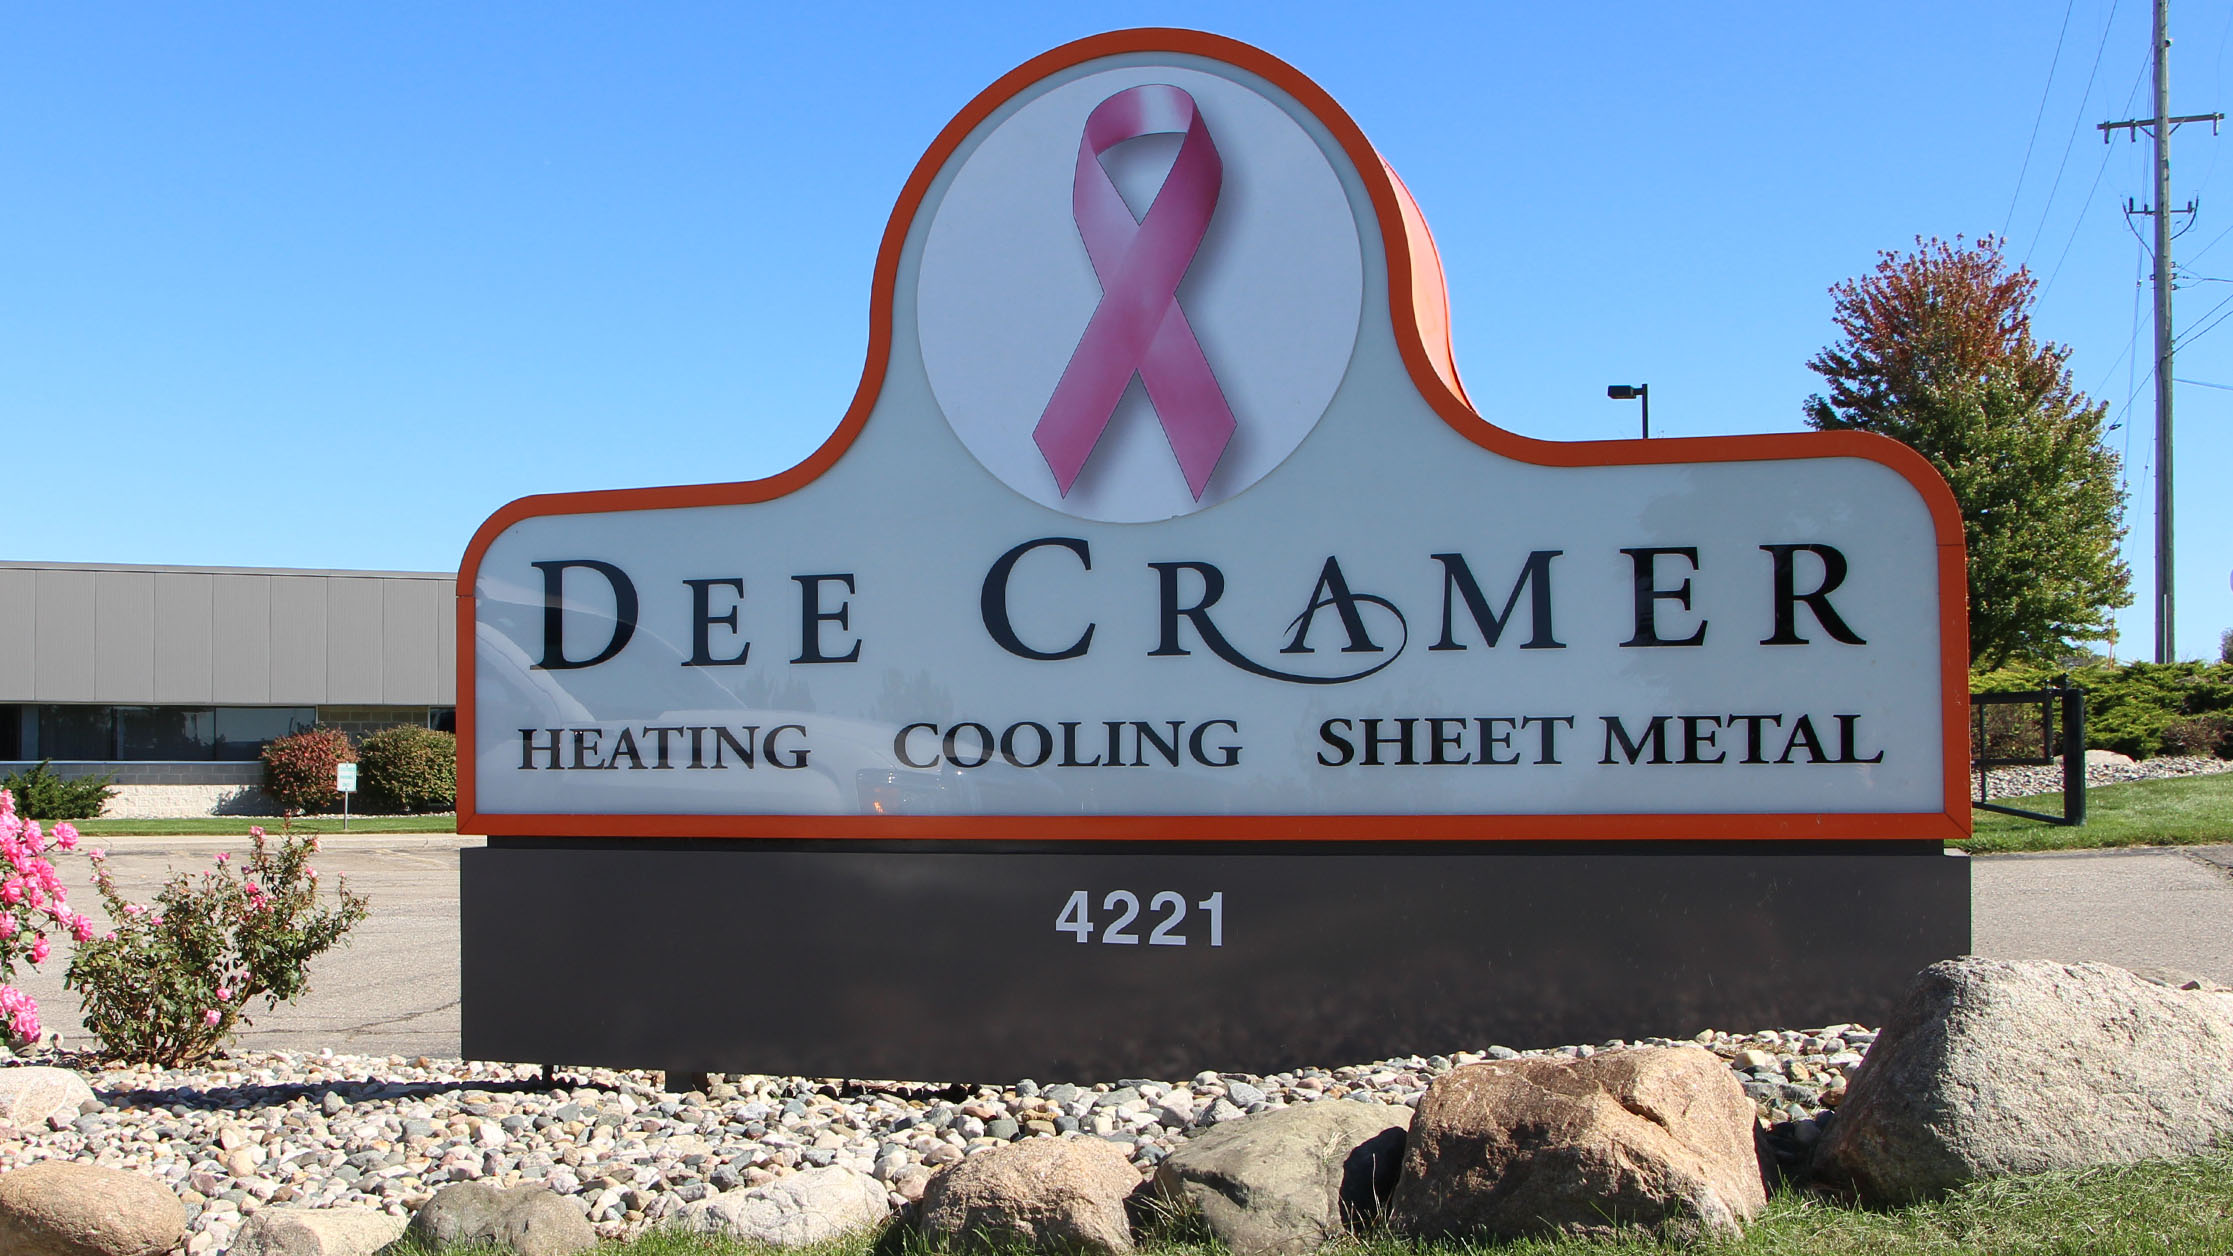 Dee Cramer supporting Breast Cancer Awareness